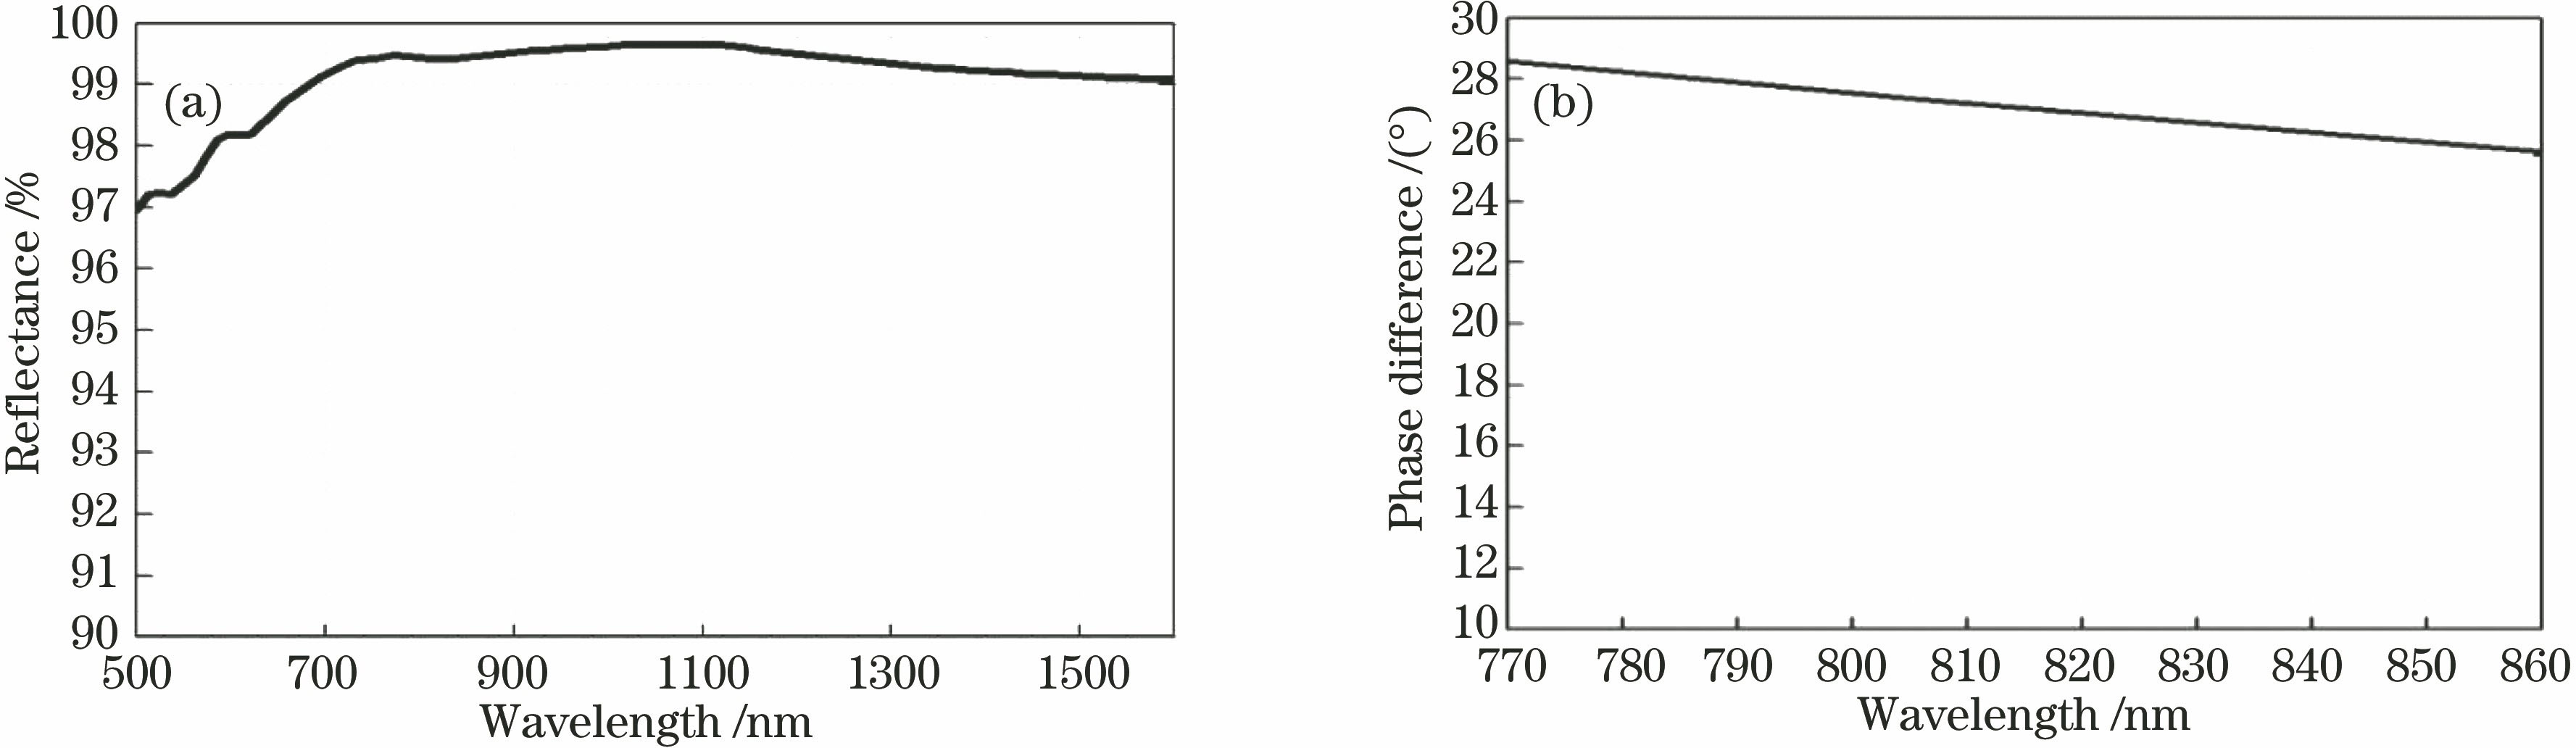 Design result of Ag+Al2O3. (a) Reflectance curve; (b) phase difference curve